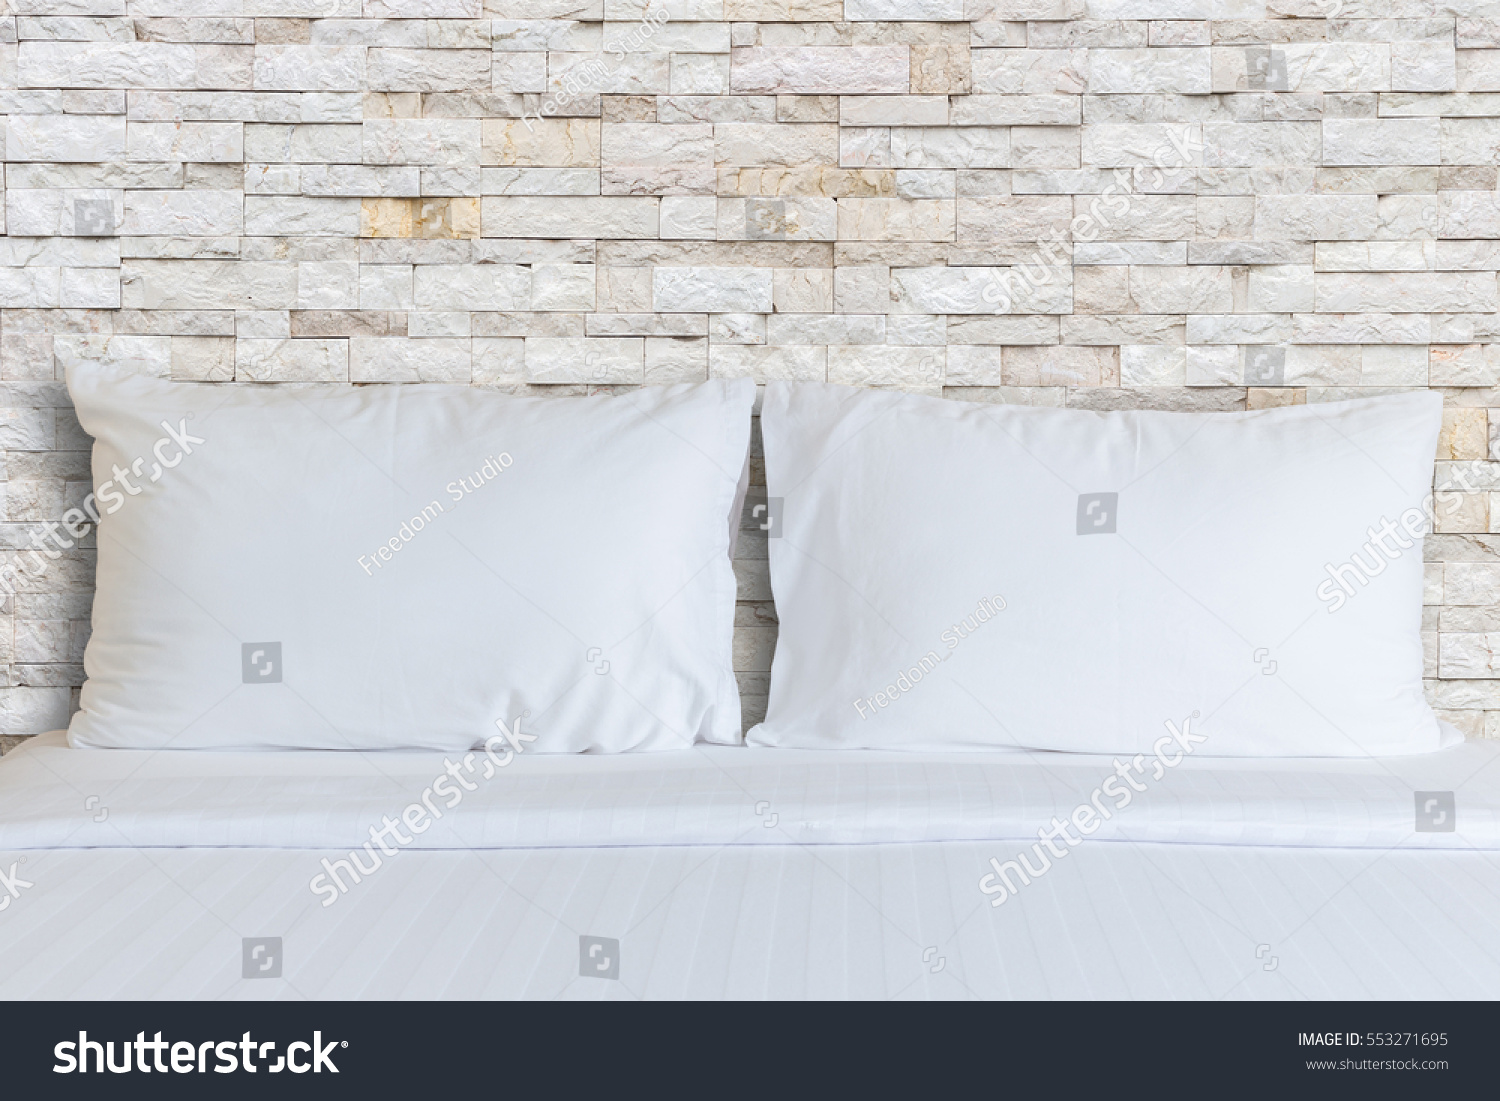 Close up white bedding sheets and pillow in hotel room. #553271695